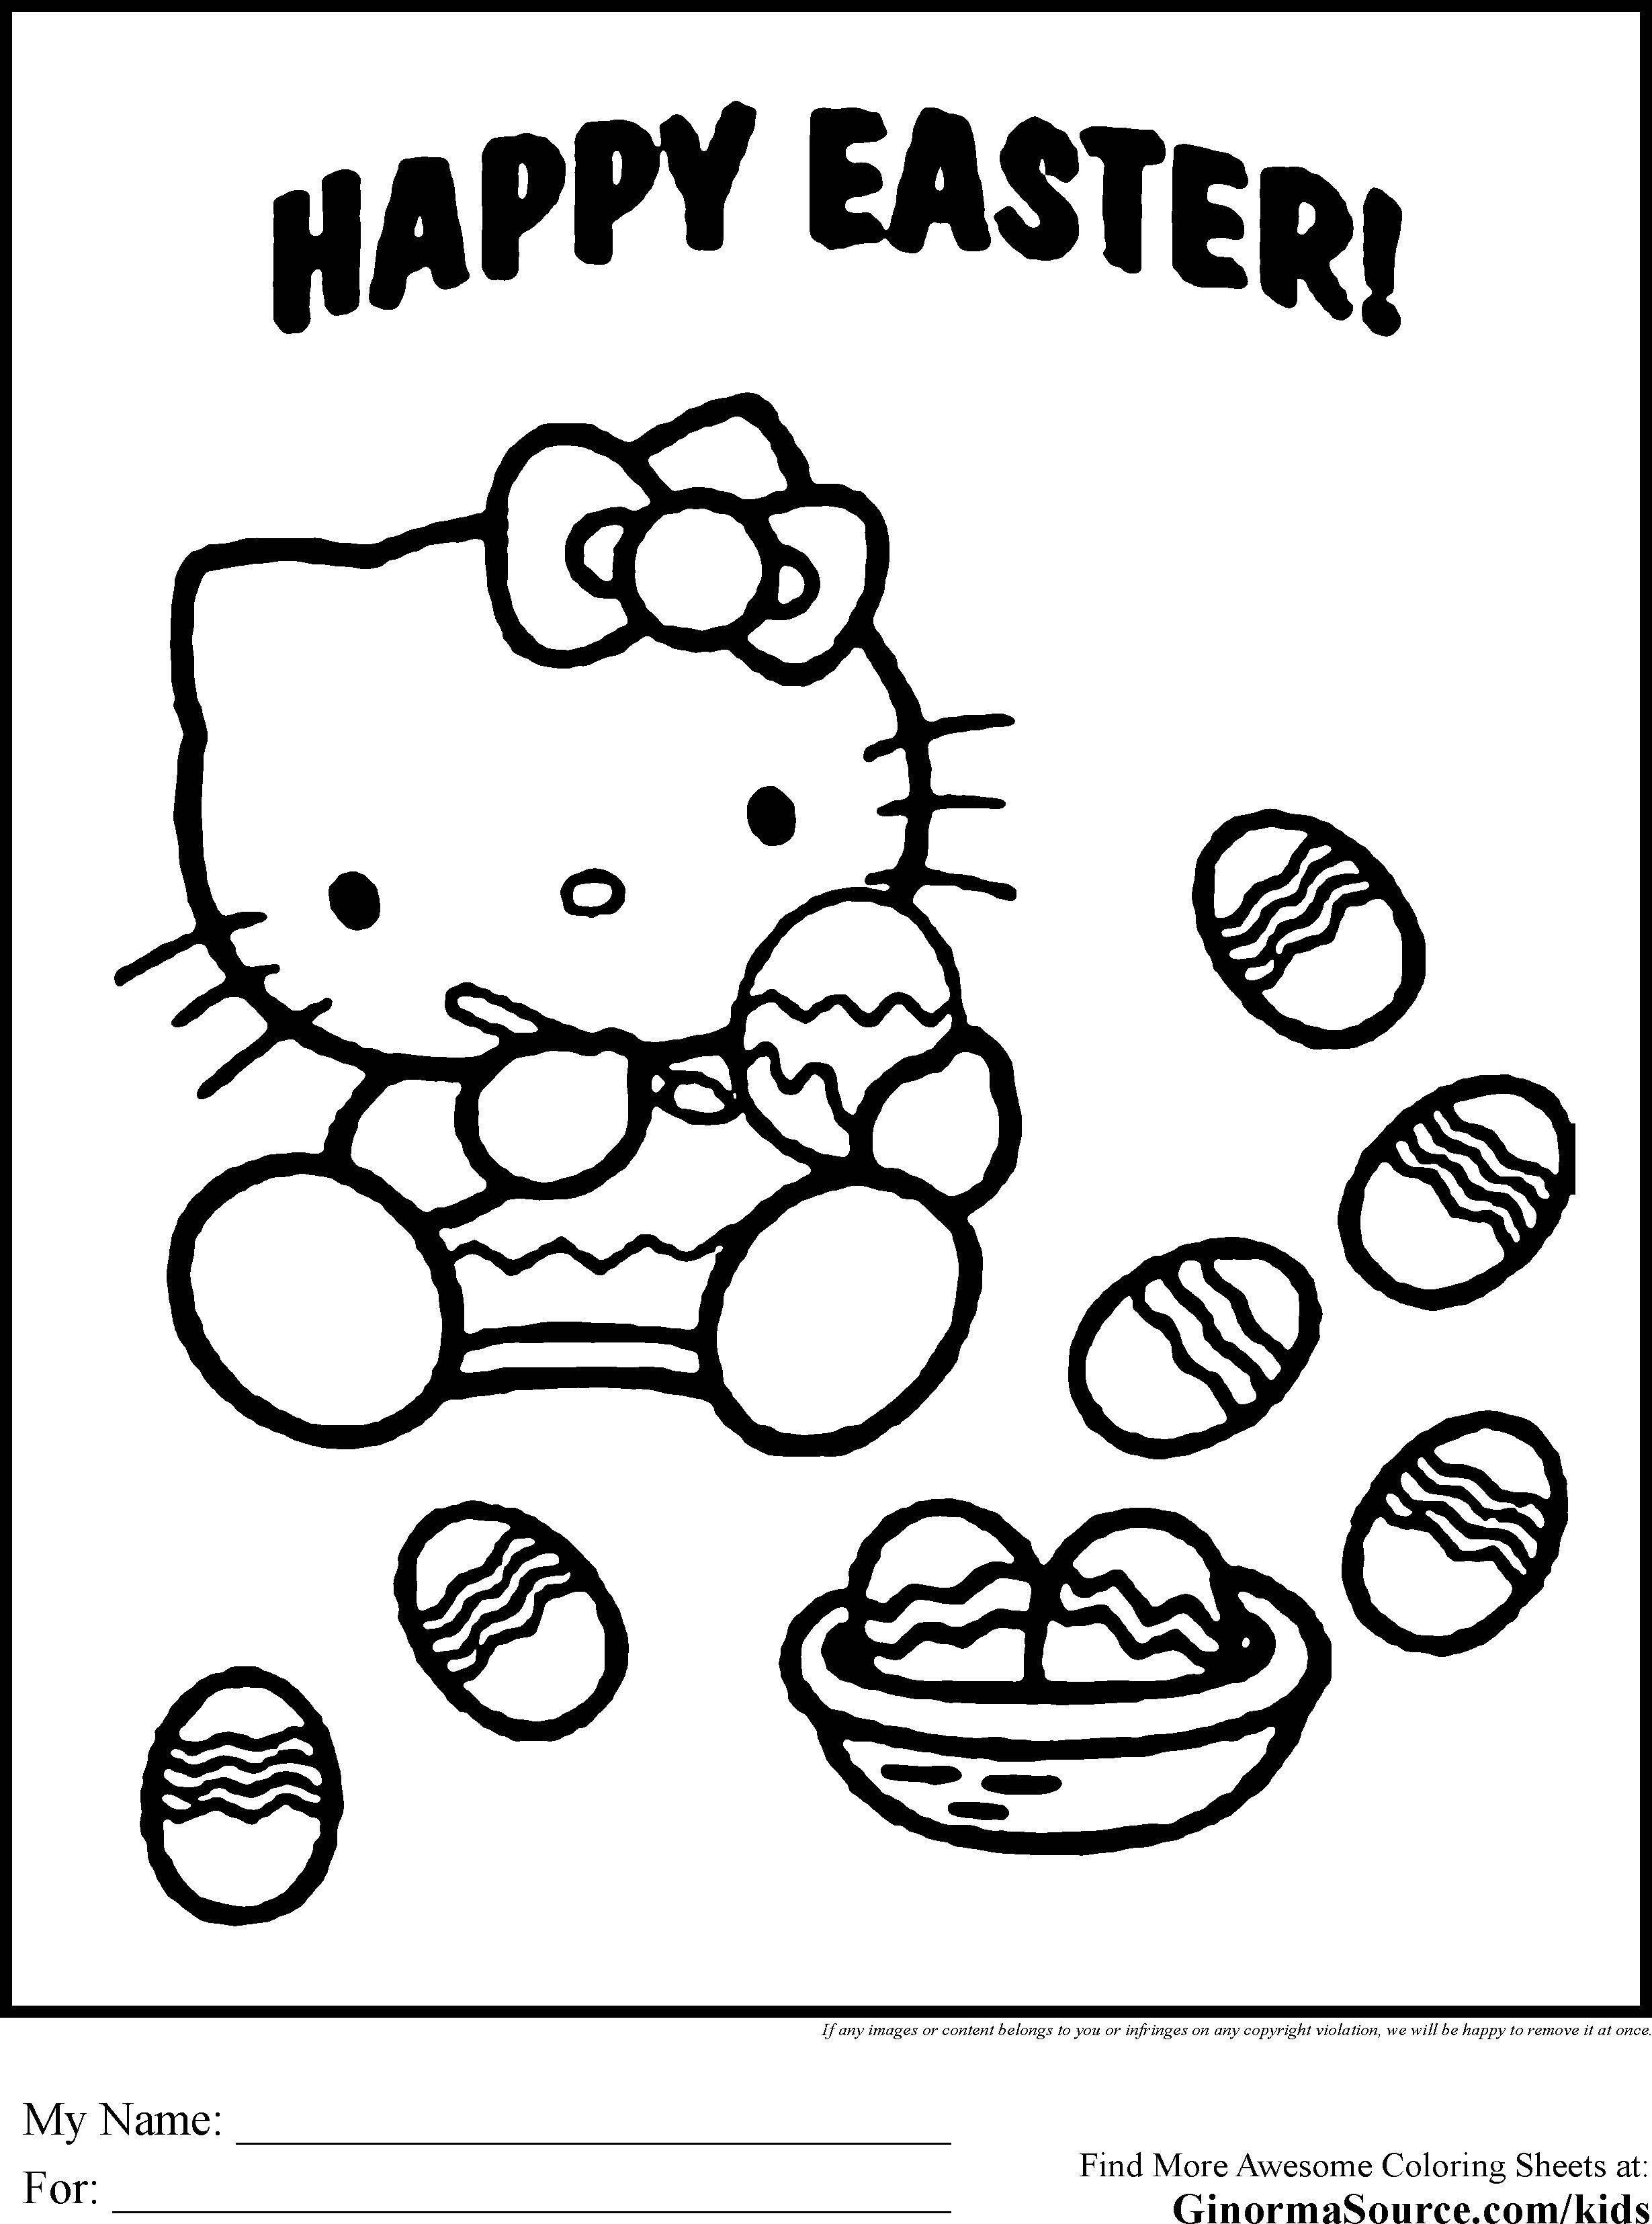 Coloring Pages Hello Kitty Easter Eggs - GINORMAsource Kids | Hello kitty  colouring pages, Hello kitty coloring, Easter coloring pages